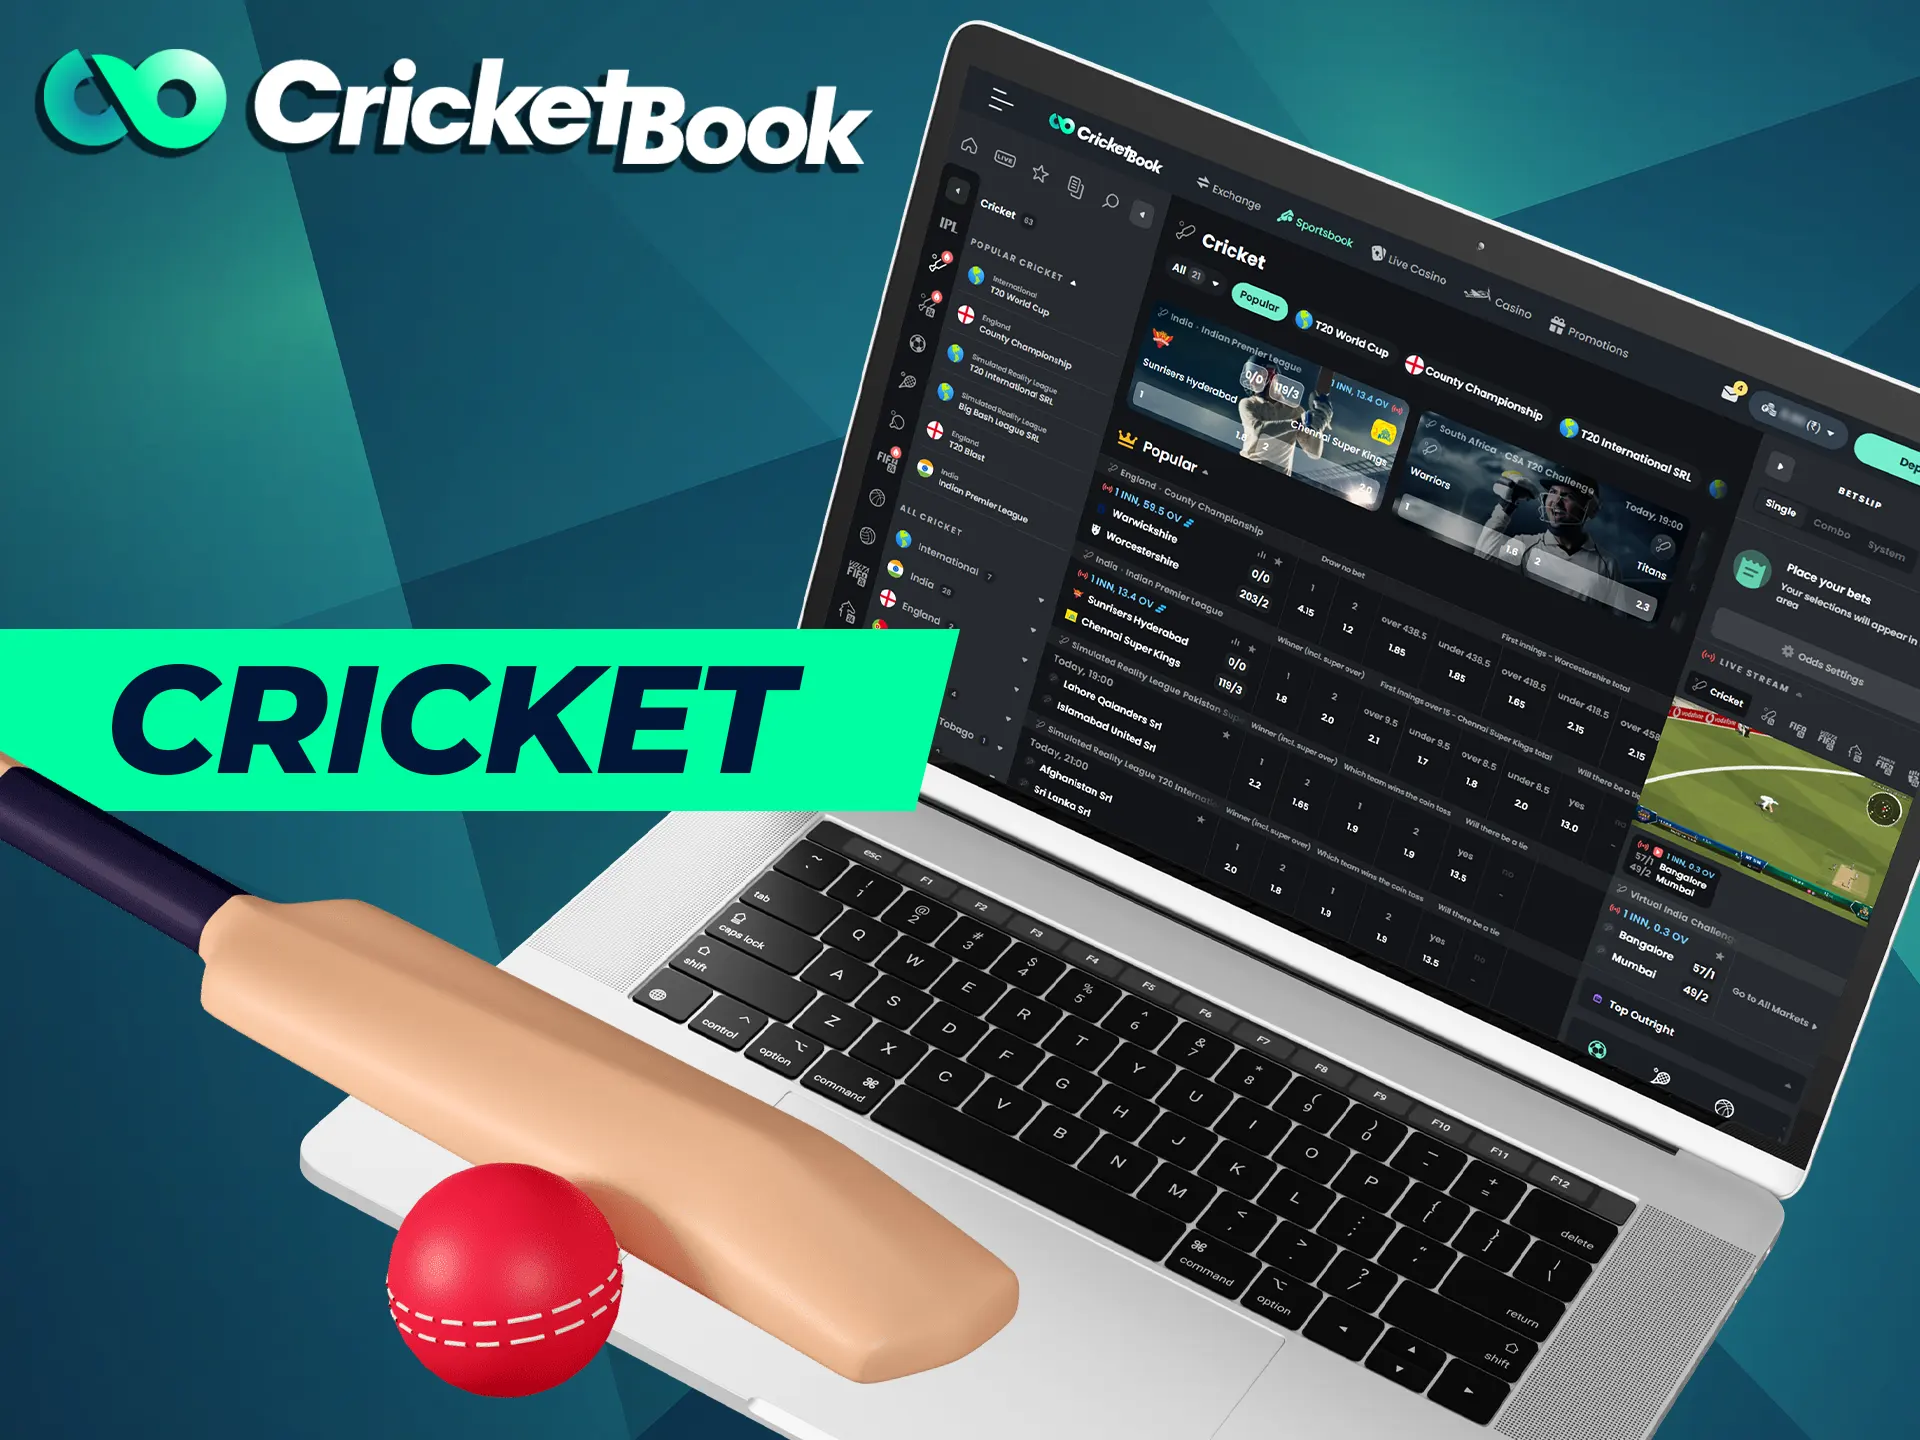 Bet on cricket and upcoming matches at CricketBook.